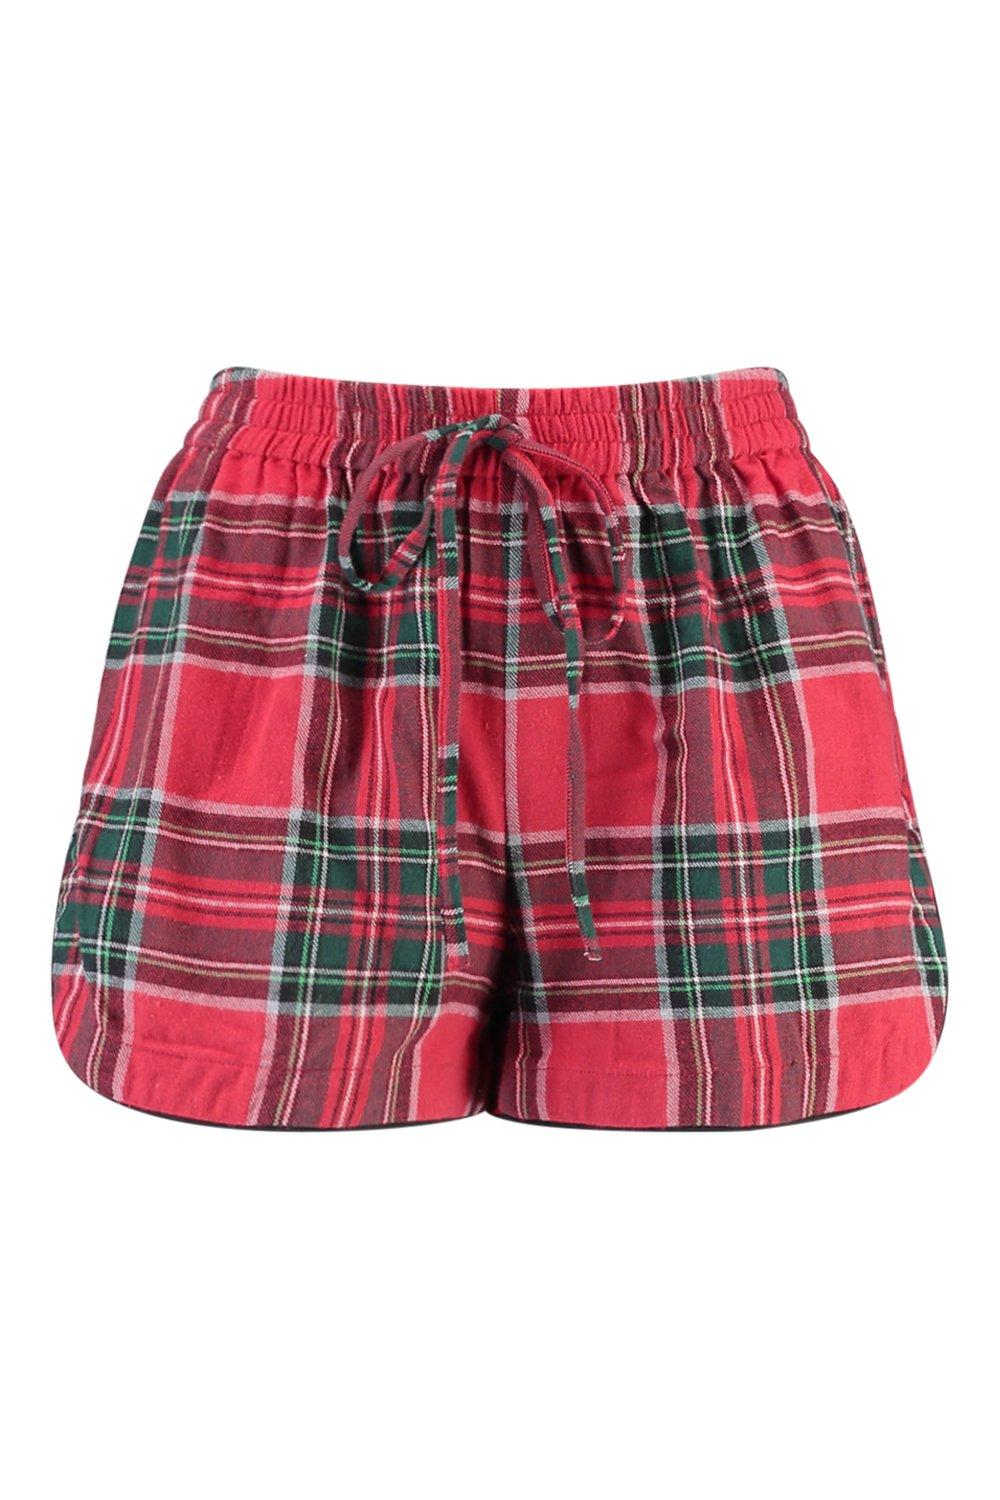 https://media.boohoo.com/i/boohoo/nzz87923_red_xl_4/female-red-mix-and-match-flannel-pj-shorts